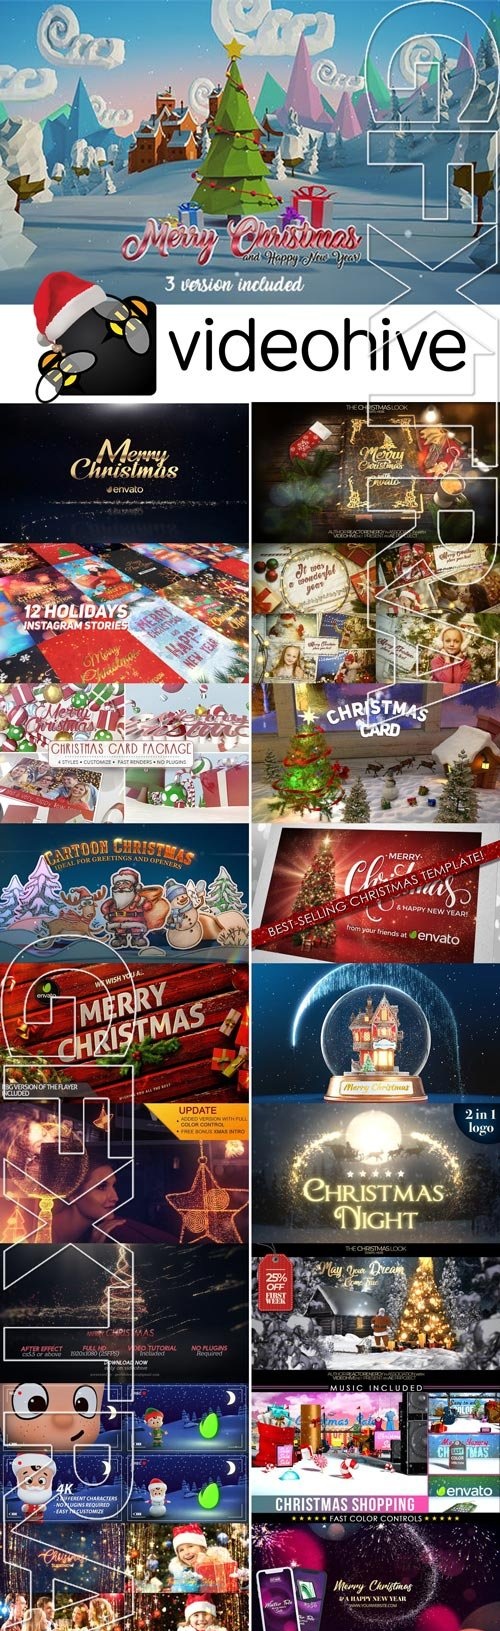 Videohive Christmas Big Pack by SceneP2P (11.2019)